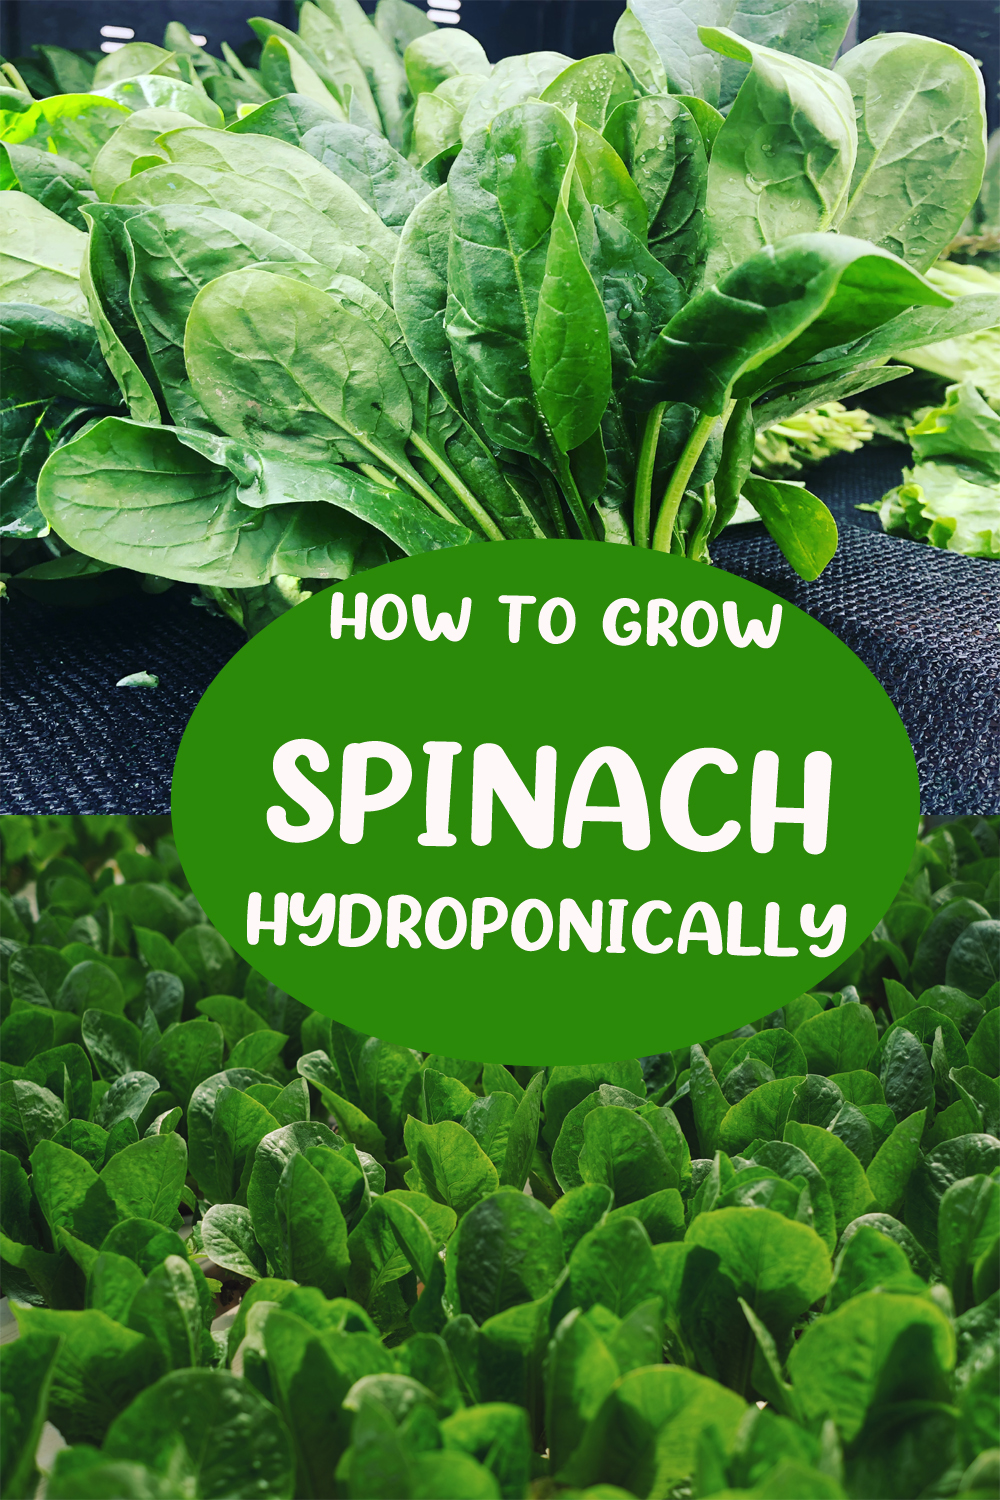 How to Grow Spinach Hydroponically?